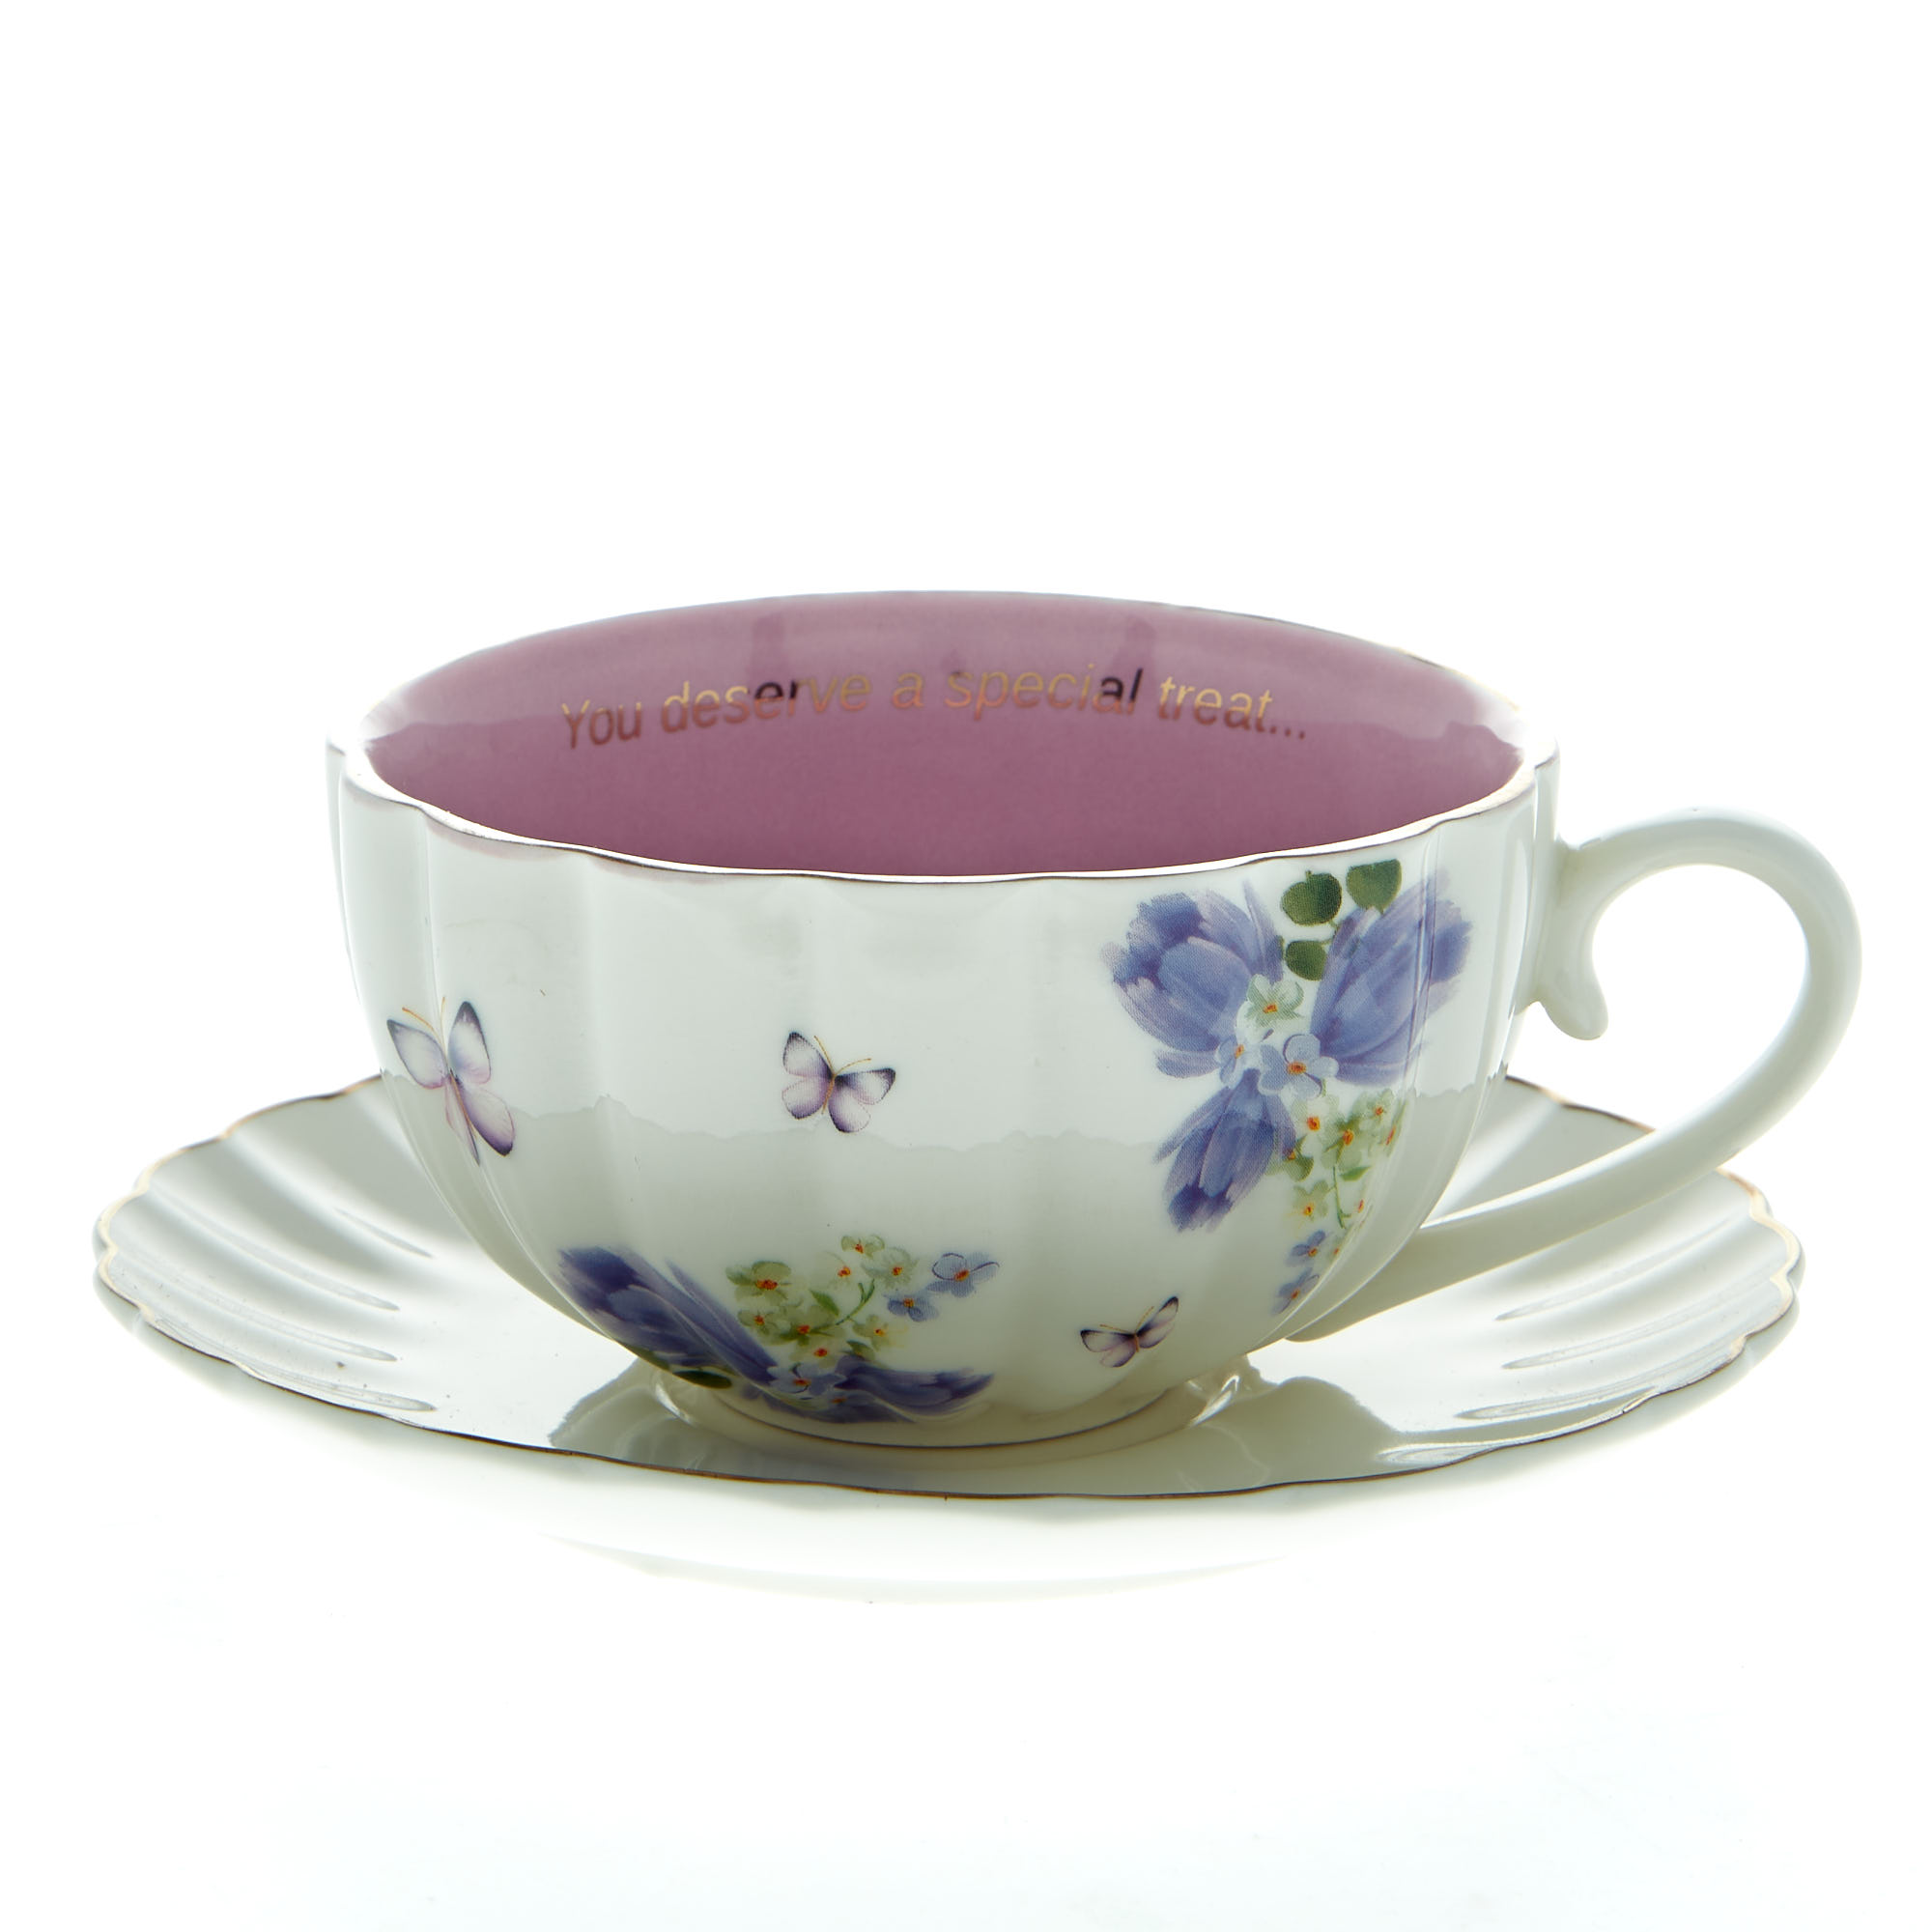 You Deserve A Special Treat Cup & Saucer